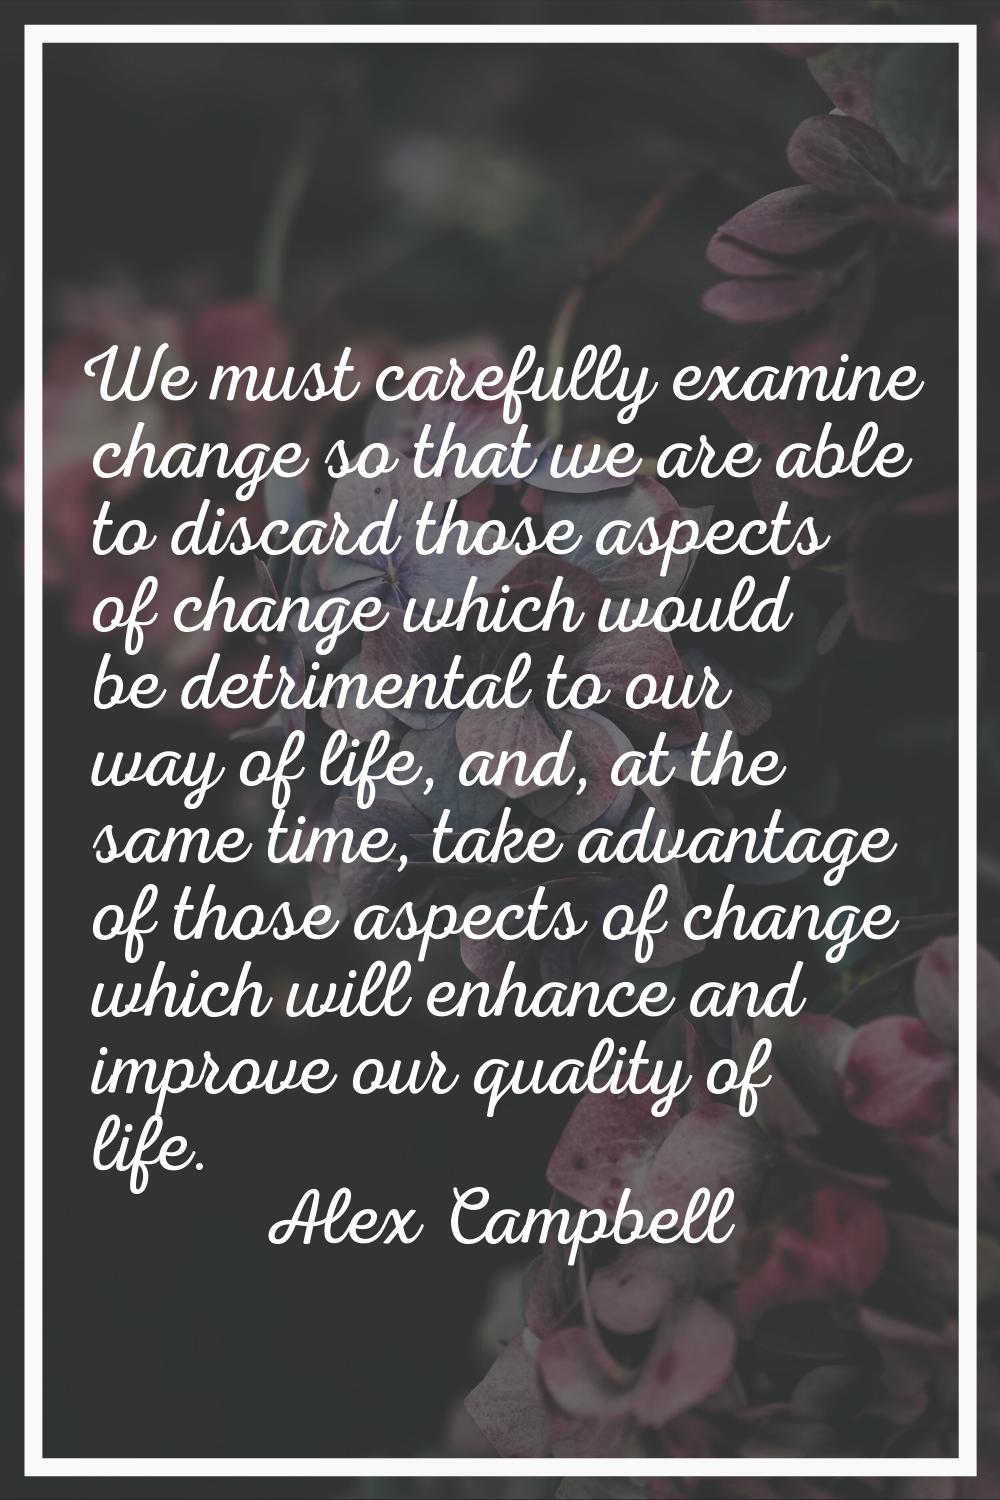 We must carefully examine change so that we are able to discard those aspects of change which would